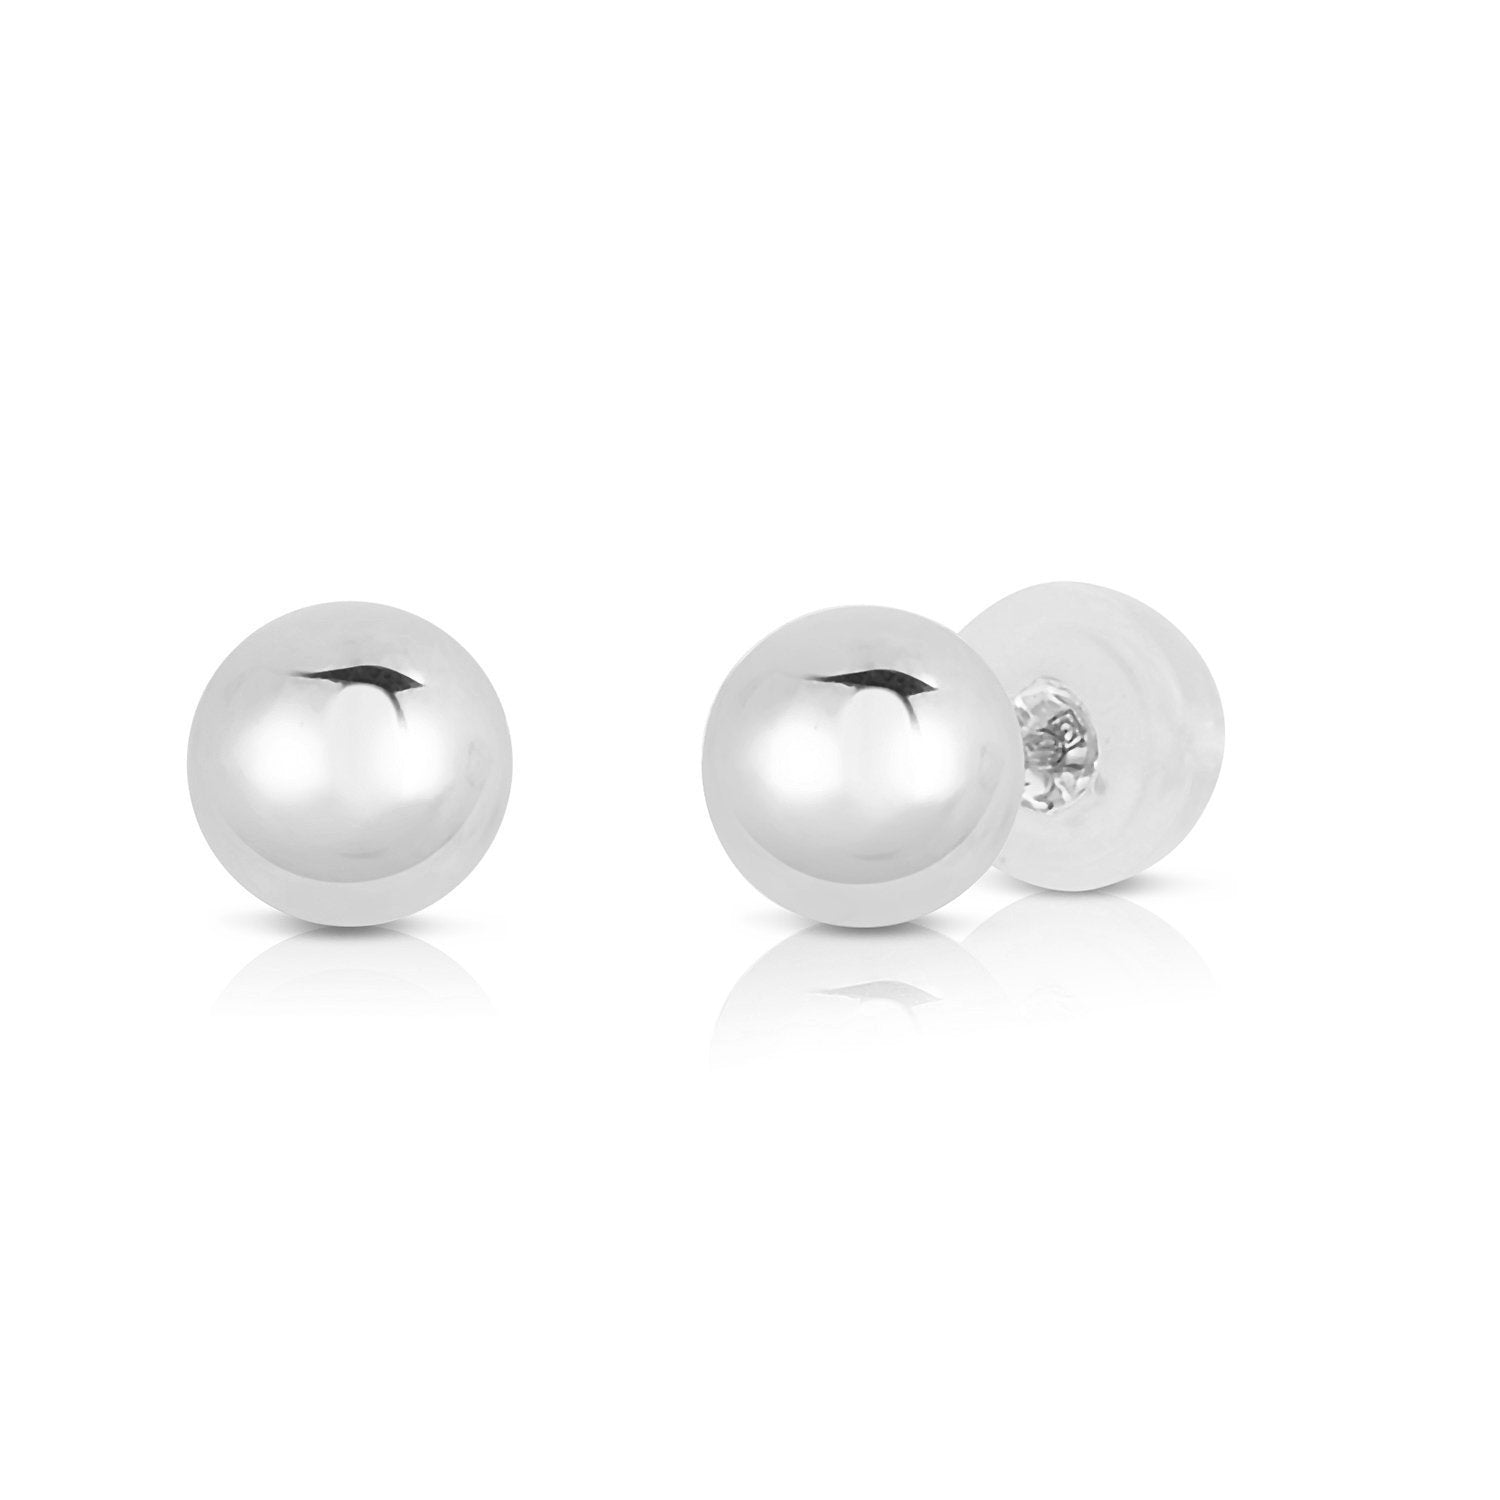 14K White Gold Ball with Silicone Backs Stud Earrings 3, 4, 5, 6, 7mm 3mm / White Gold